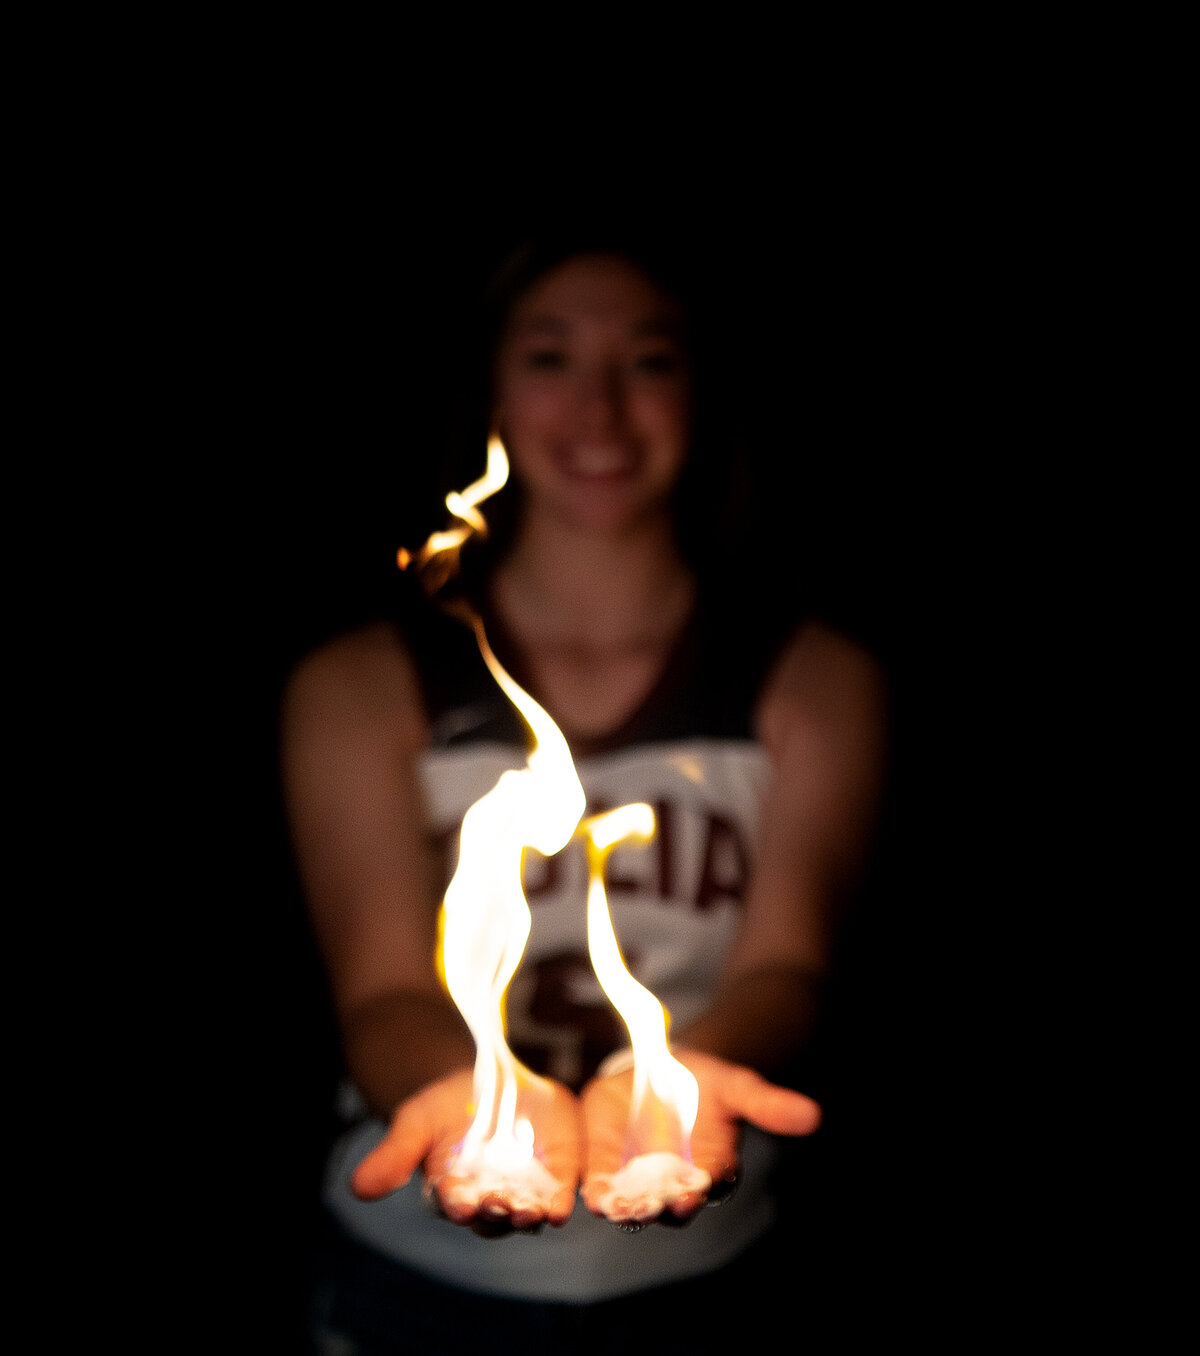 Tulia high school varsity basketball player holding fire in her hands